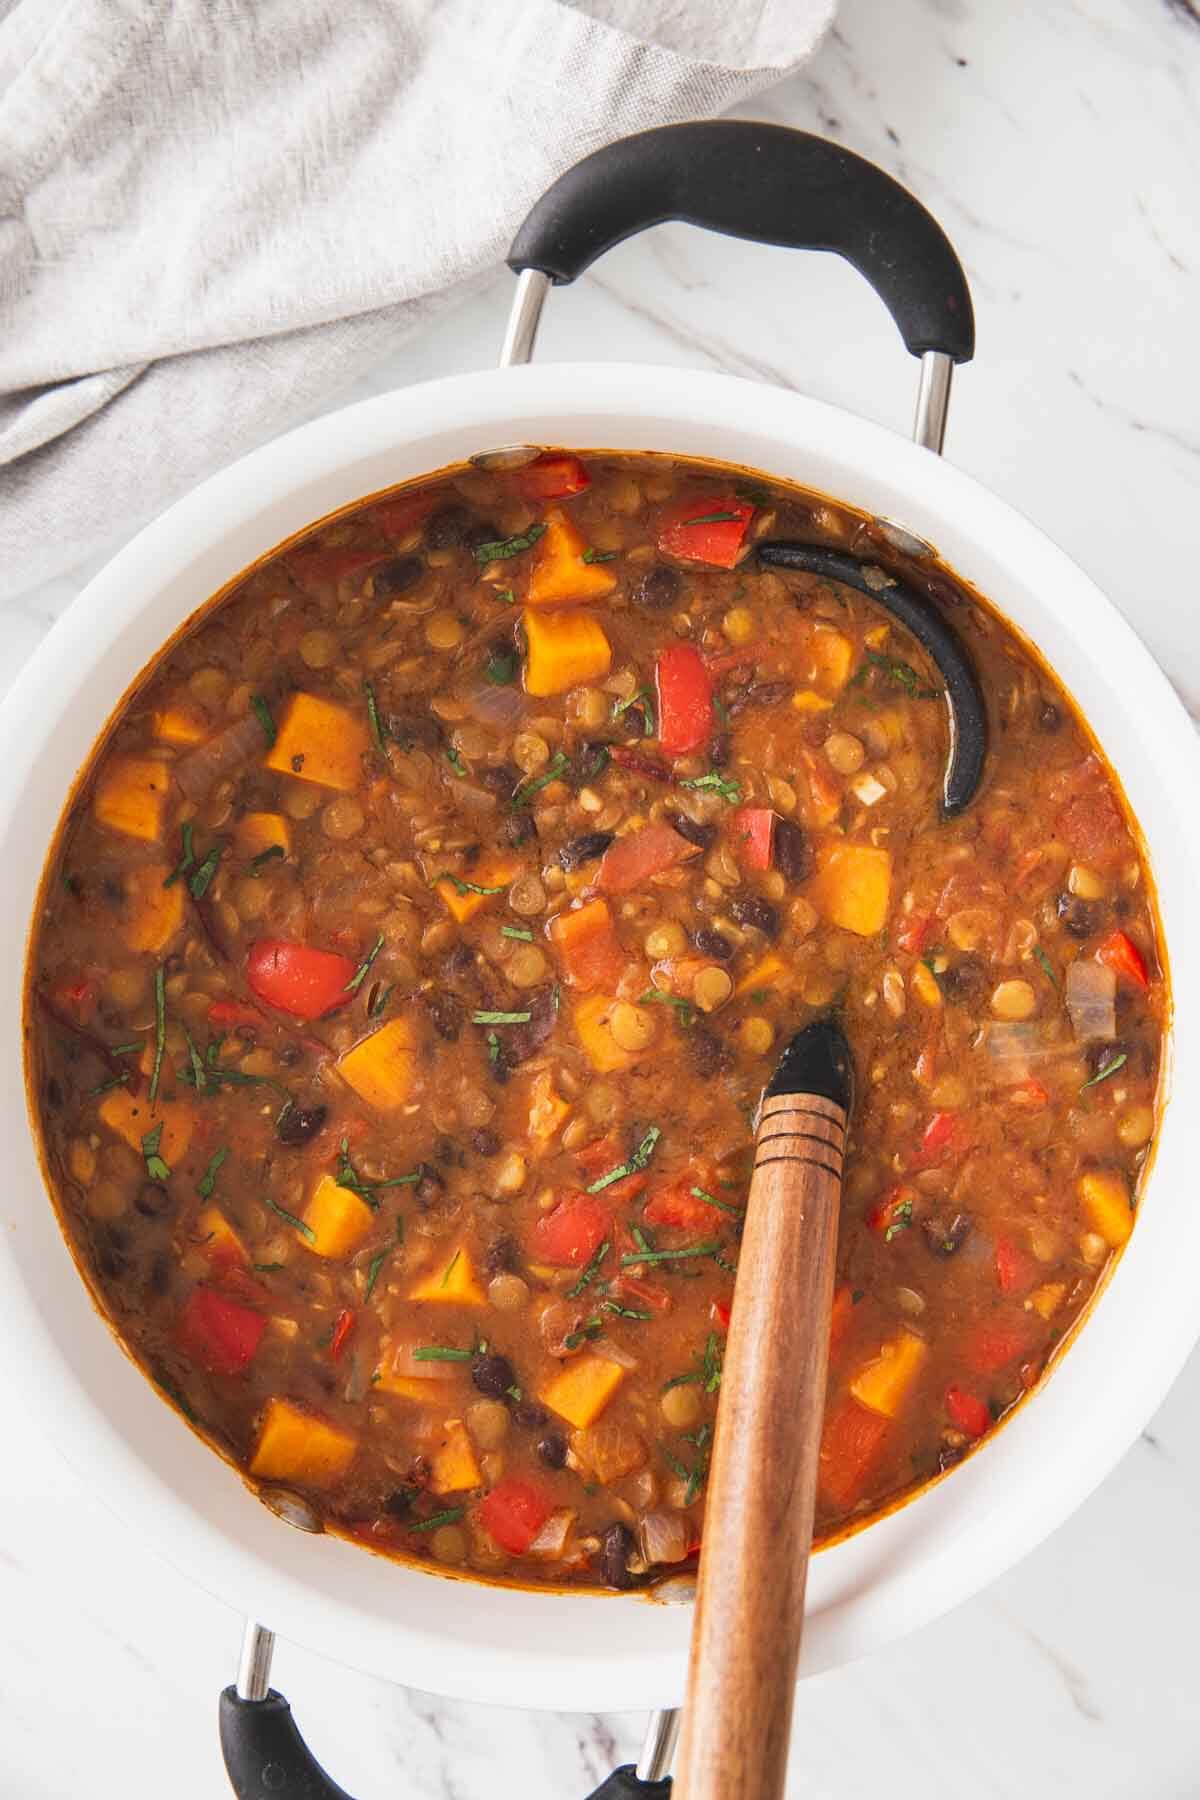 Sweet potato lentil chili prepared in a large pot and is ready to serve.